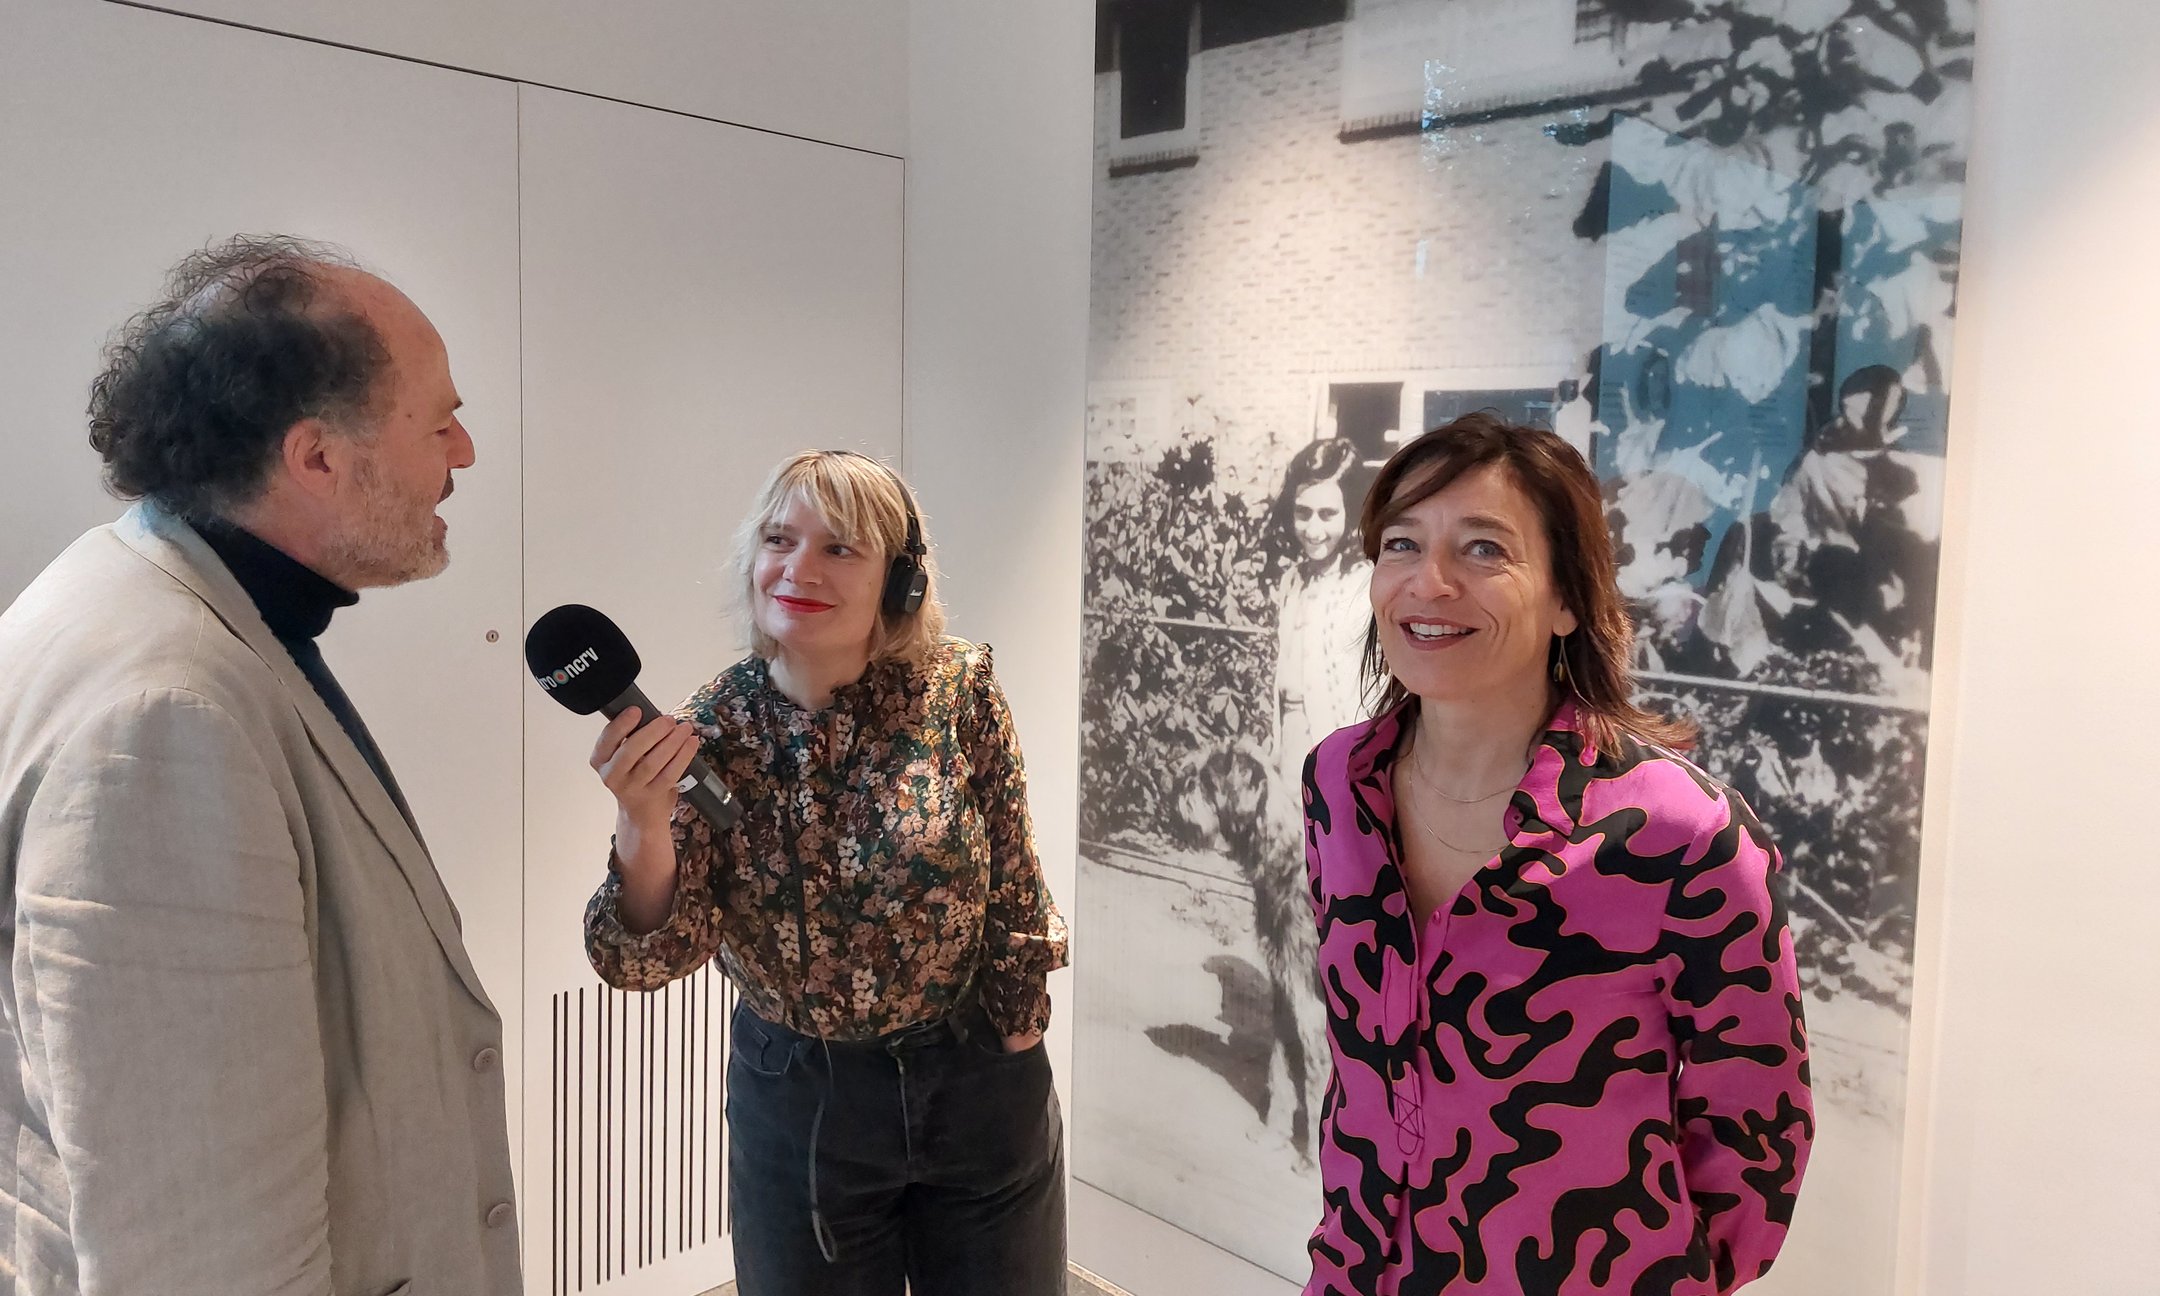 Anne van der Veen reporter from NPO radio 1 talking to Ronald Leopold, executive director Anne Frank House, and right Cathelijne Broers, director Prins Bernhard Cultuur Fonds, during the announcement on the radio programme 'Spraakmakers'